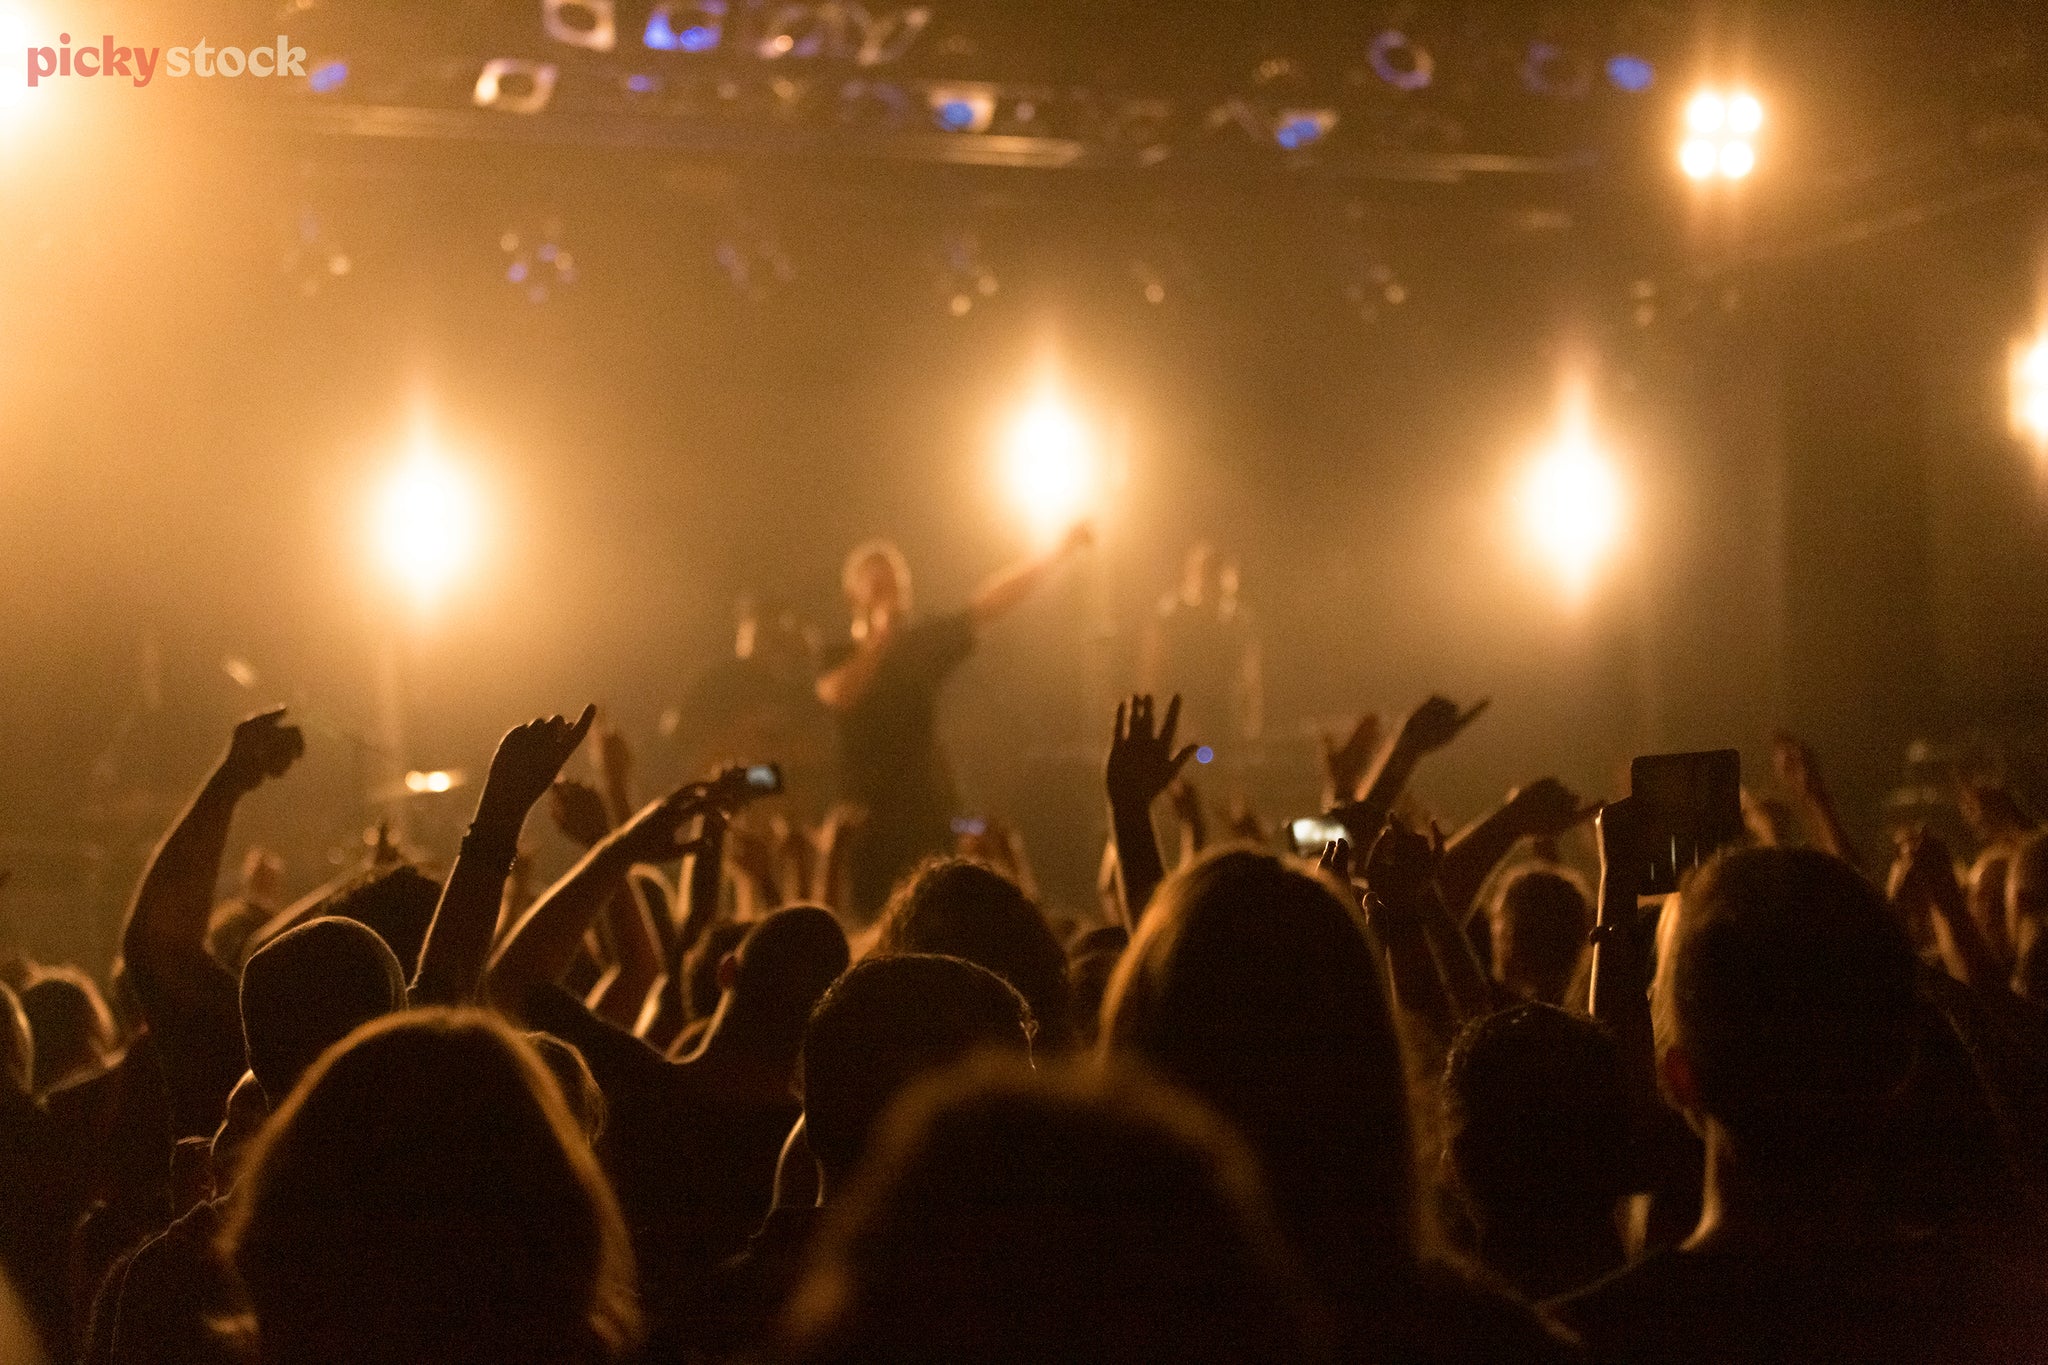 In a concert crowd mosh-pit, close to stage as hands and arms are raised in the air. Band is unrecognisable as the orange lights block the viewpoint. 